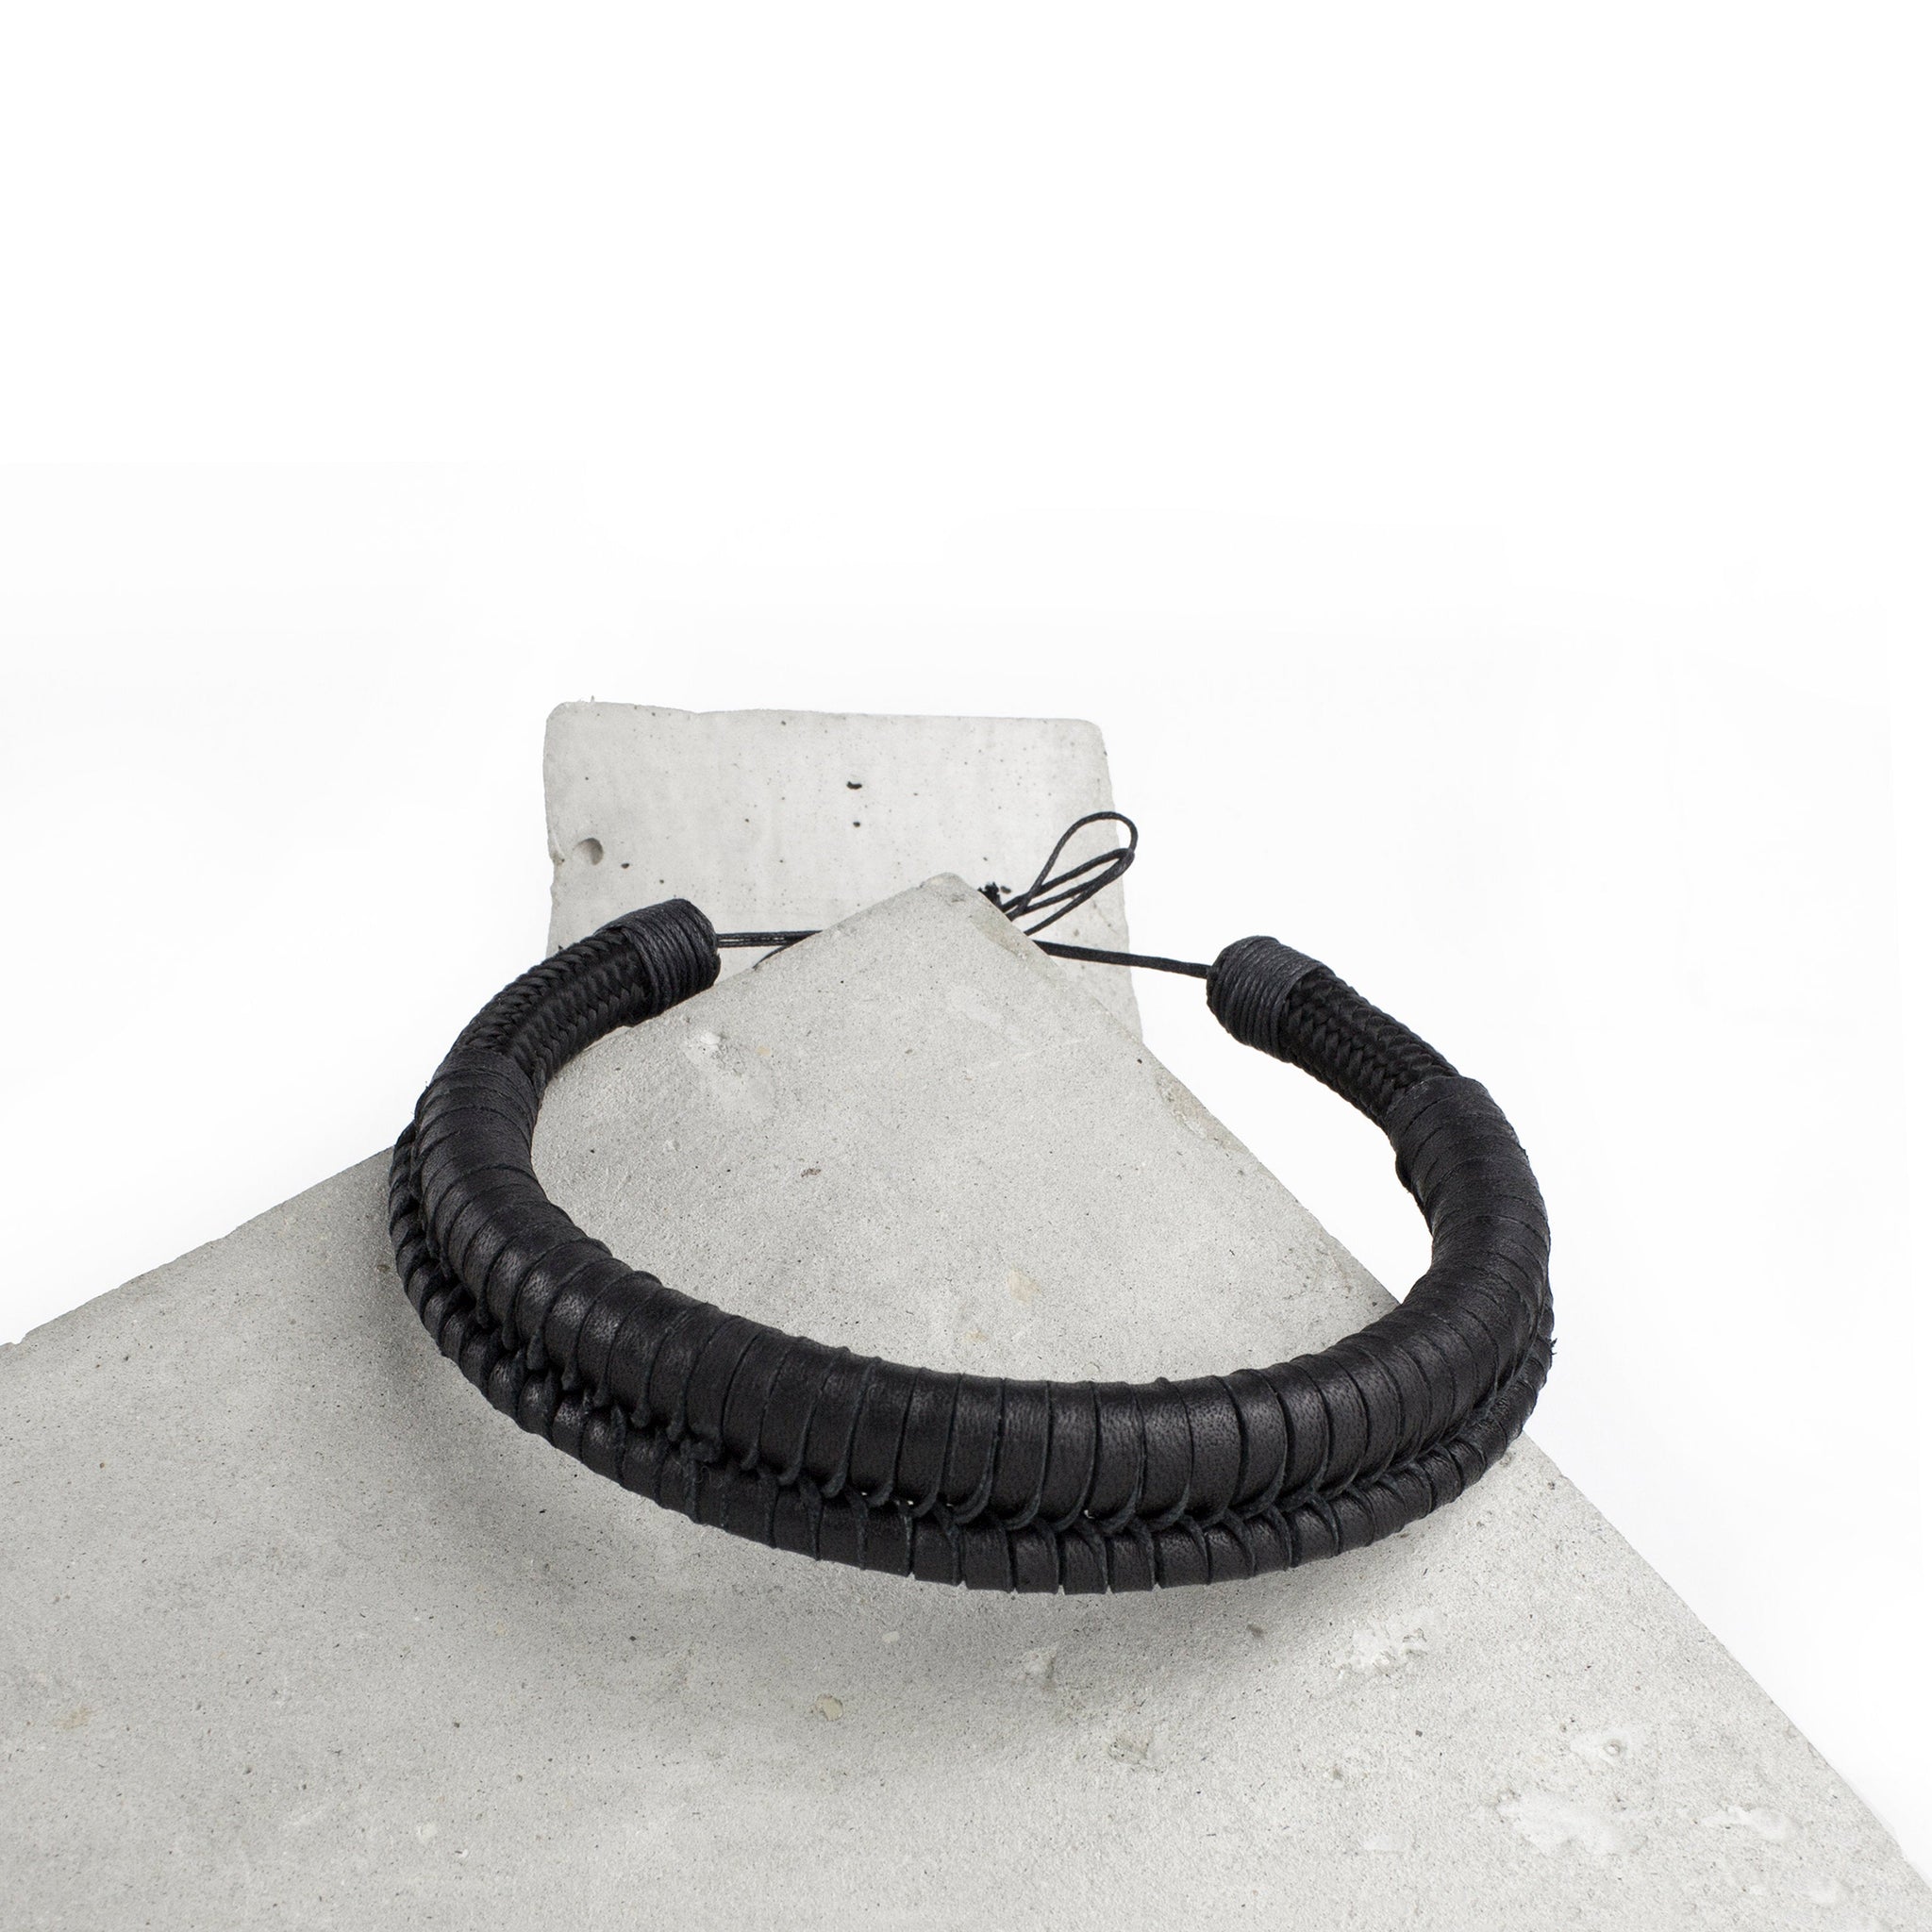 Black leather and rope necklace handmade minimal macrame knotted-adjustable, black, black leather necklace, black necklace, bold, collar, designer, designer jewelry, hand-woven, Jewelry, knotted, leather jewelry, leather necklace, macrame, minimal, minimalist, Necklace, recycled, recycled jewelry, recycled_leather, string, thick, tie, unique-Mimikri